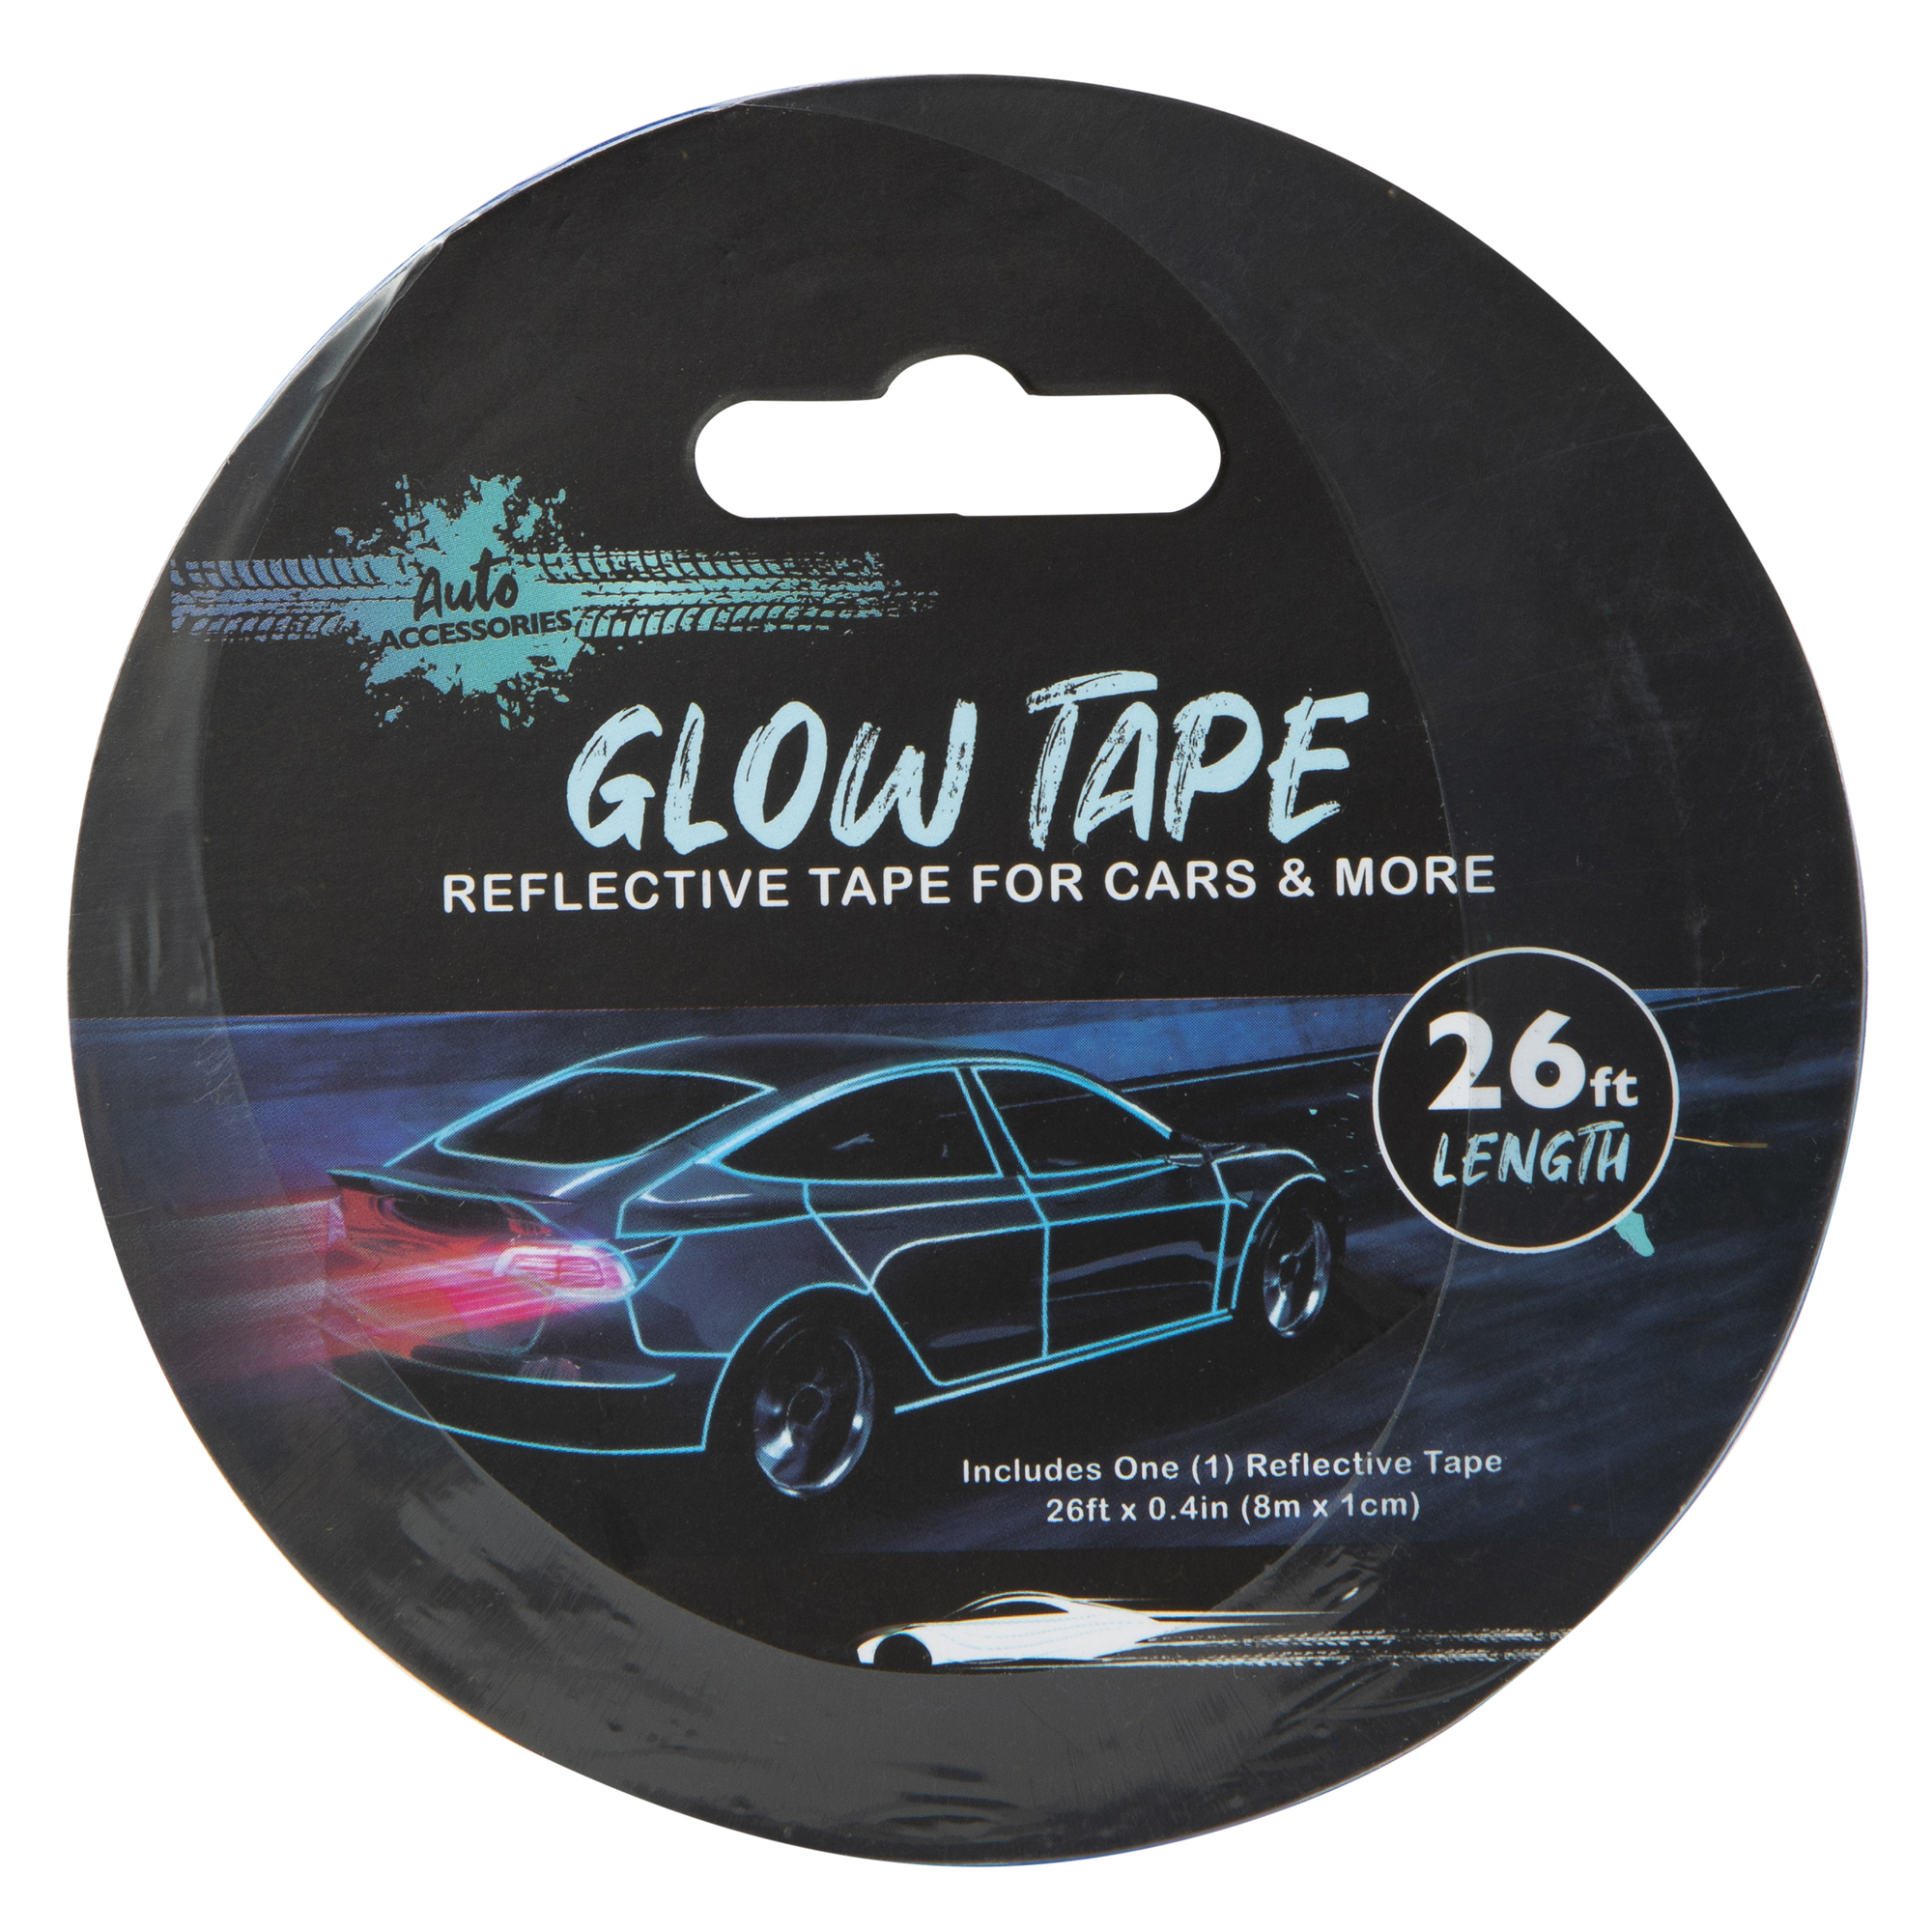 reflective tape for cars & more 26ft